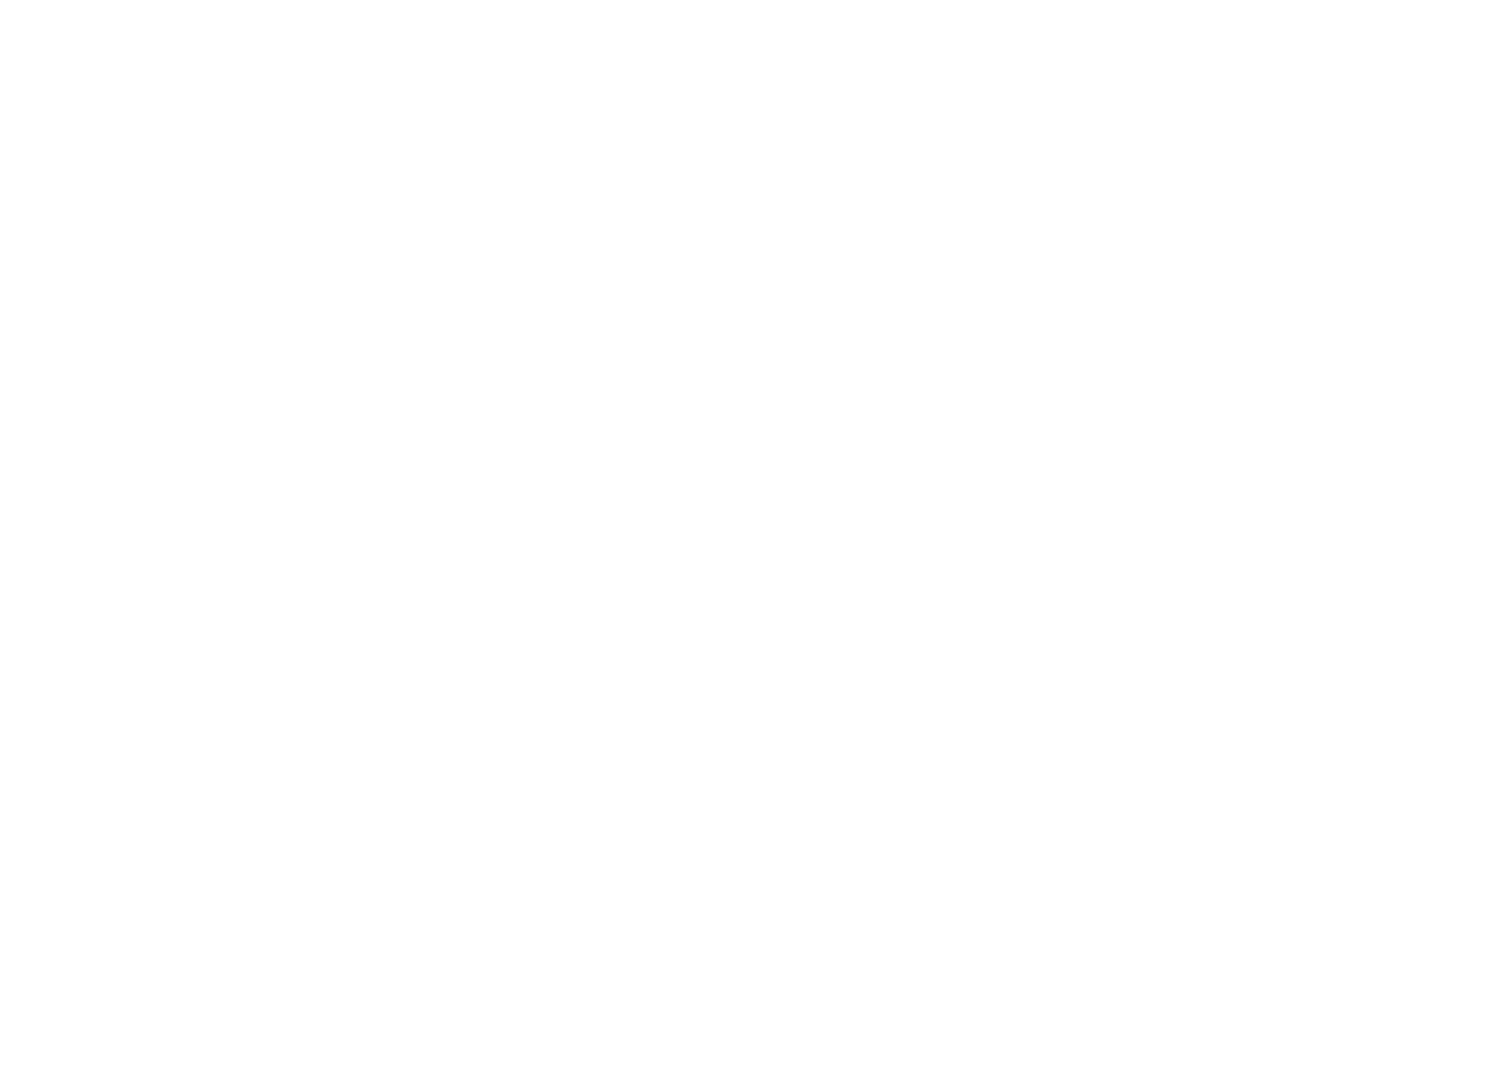 Soaps by Hailey